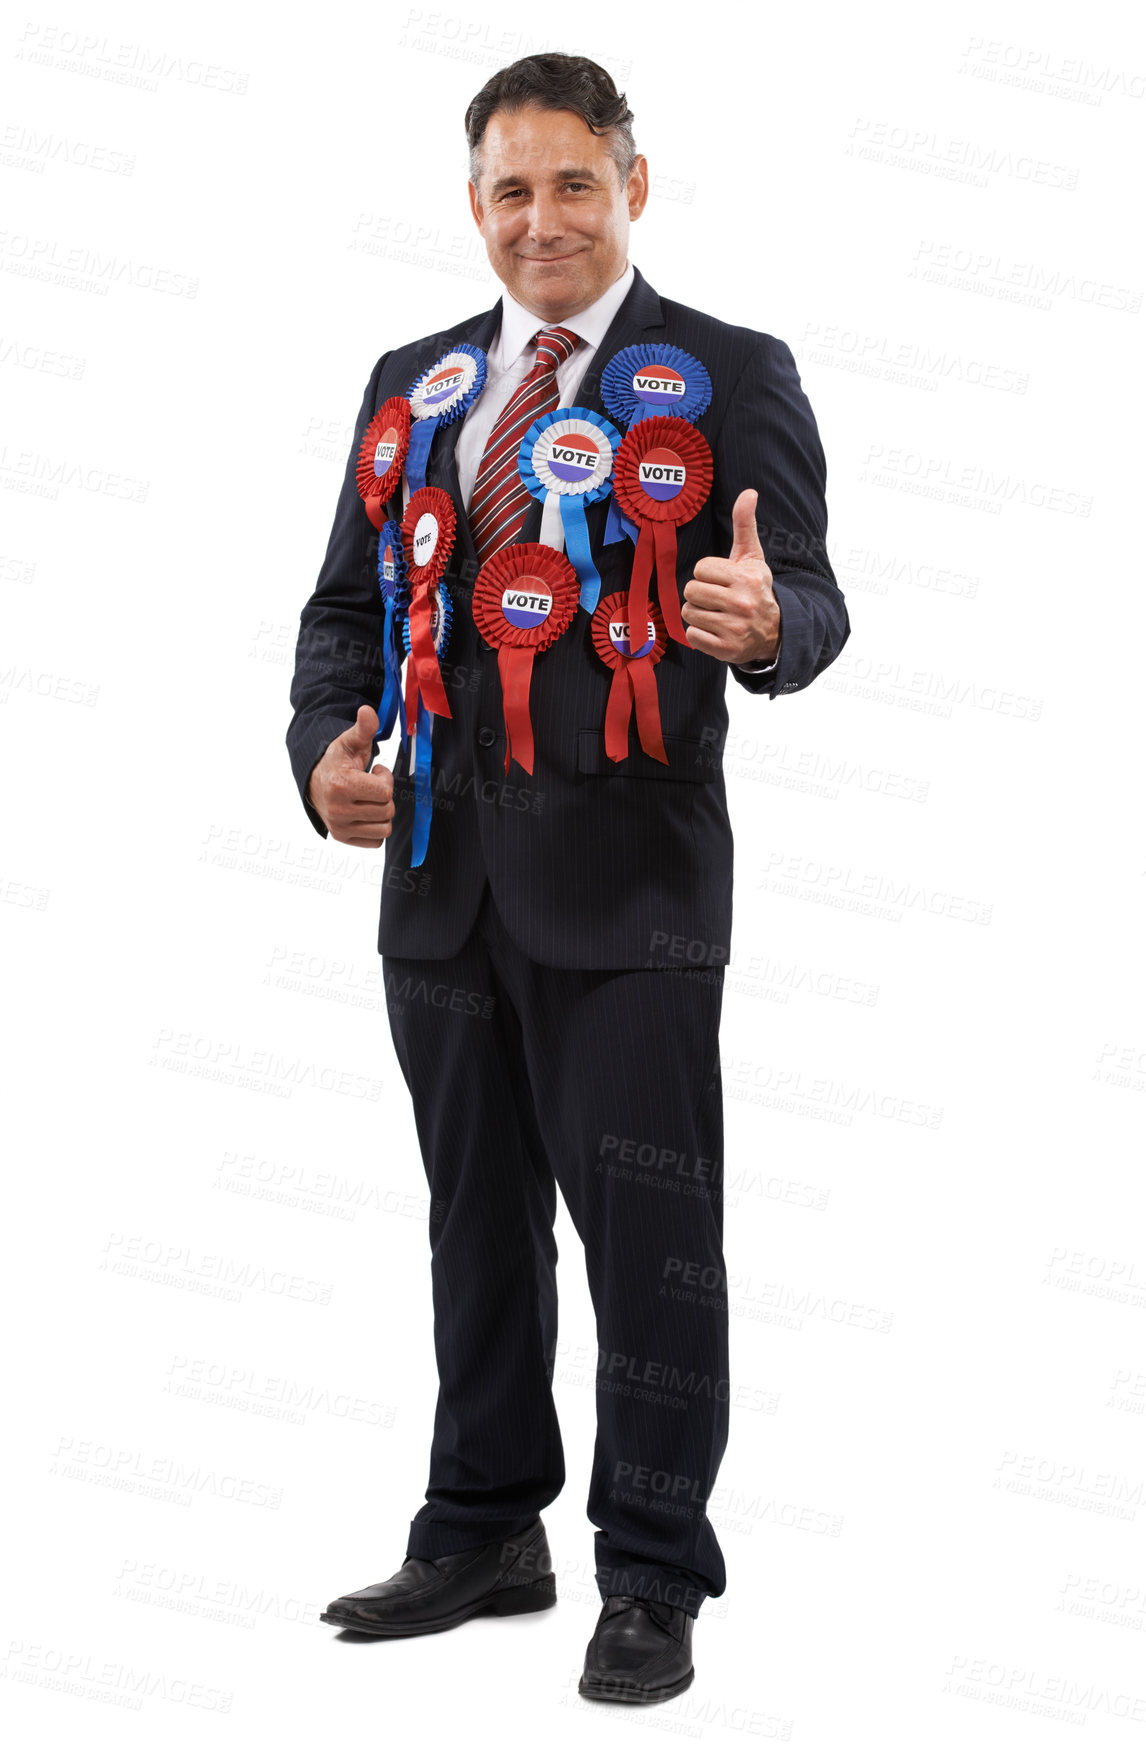 Buy stock photo Portrait of a friendly looking politician wearing voting ribbons and giving you the thumbs up